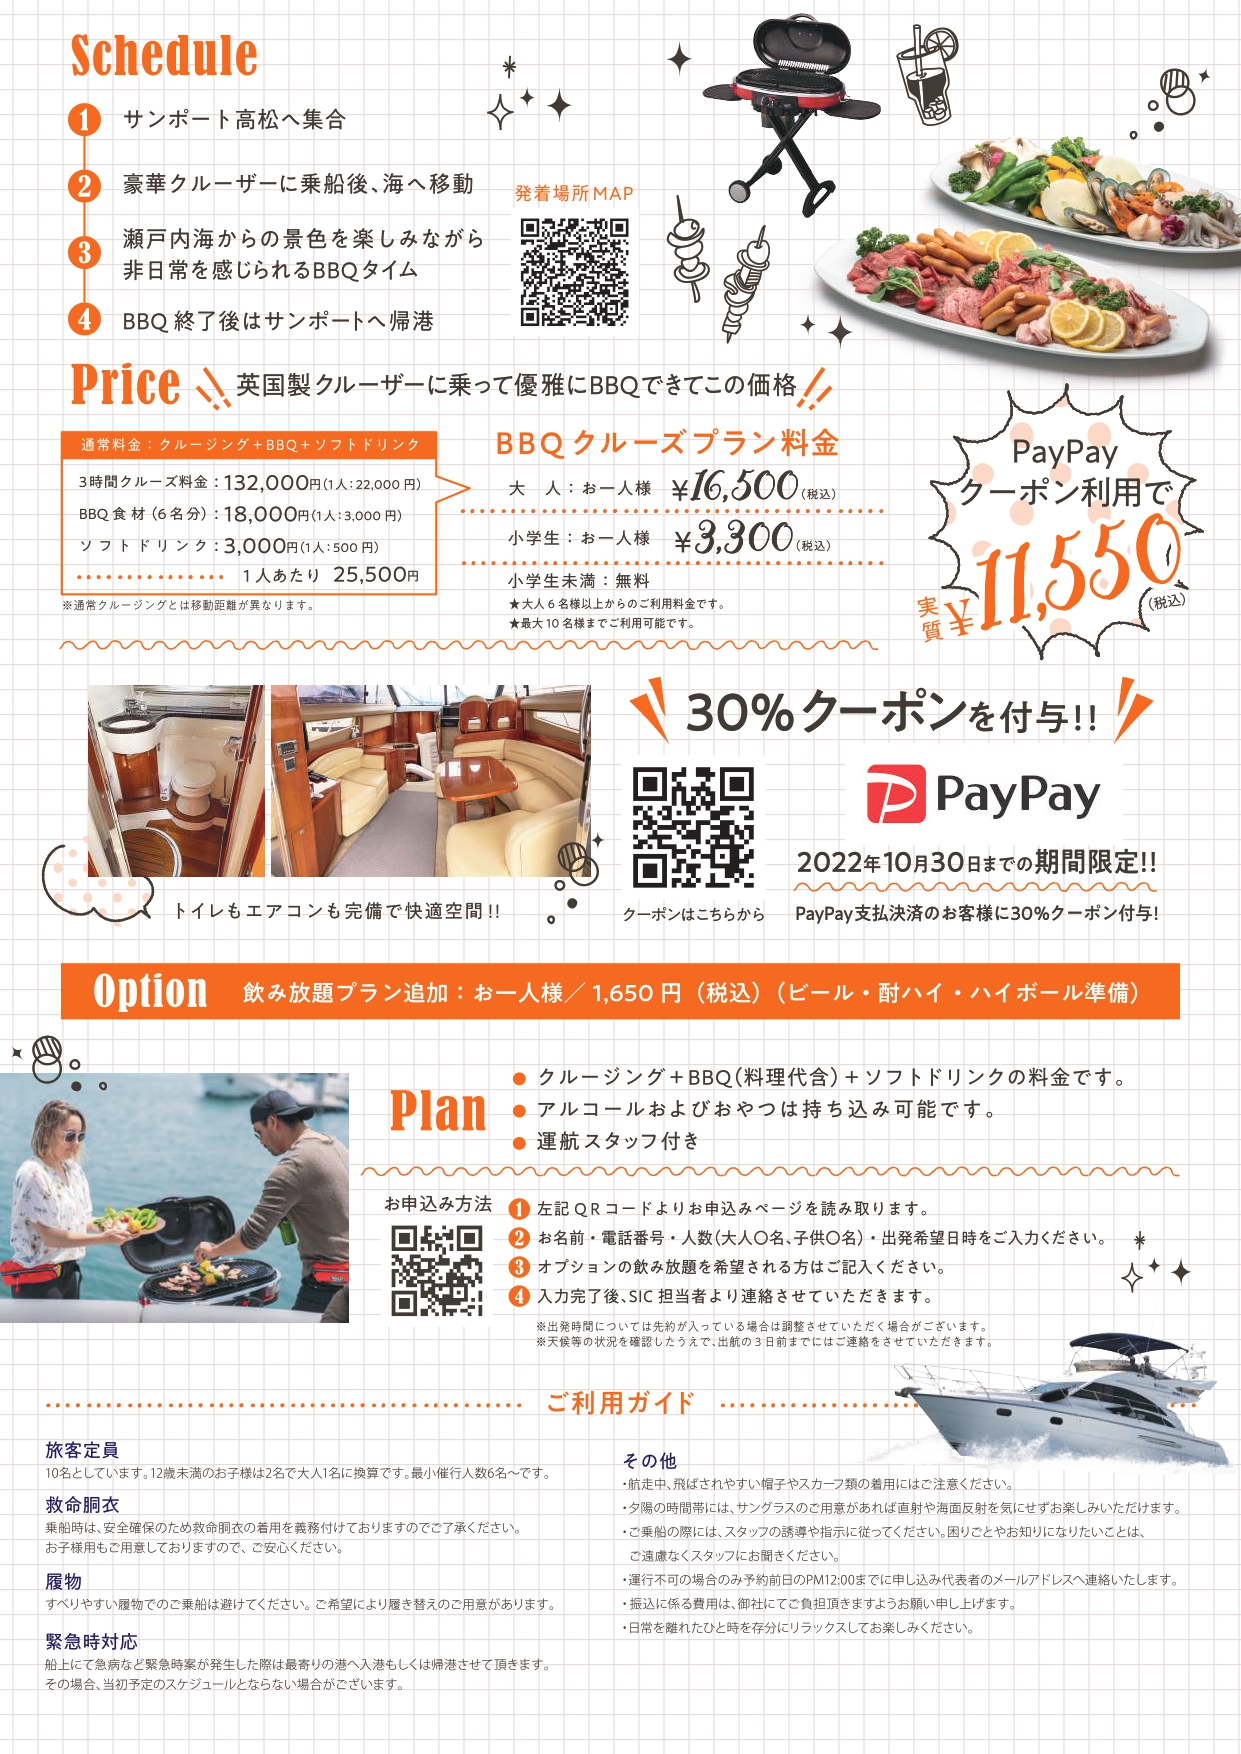  【New Discovery BBQ クルーズ】会社仲間や家族同士で新しい瀬戸内をみつけよう！！